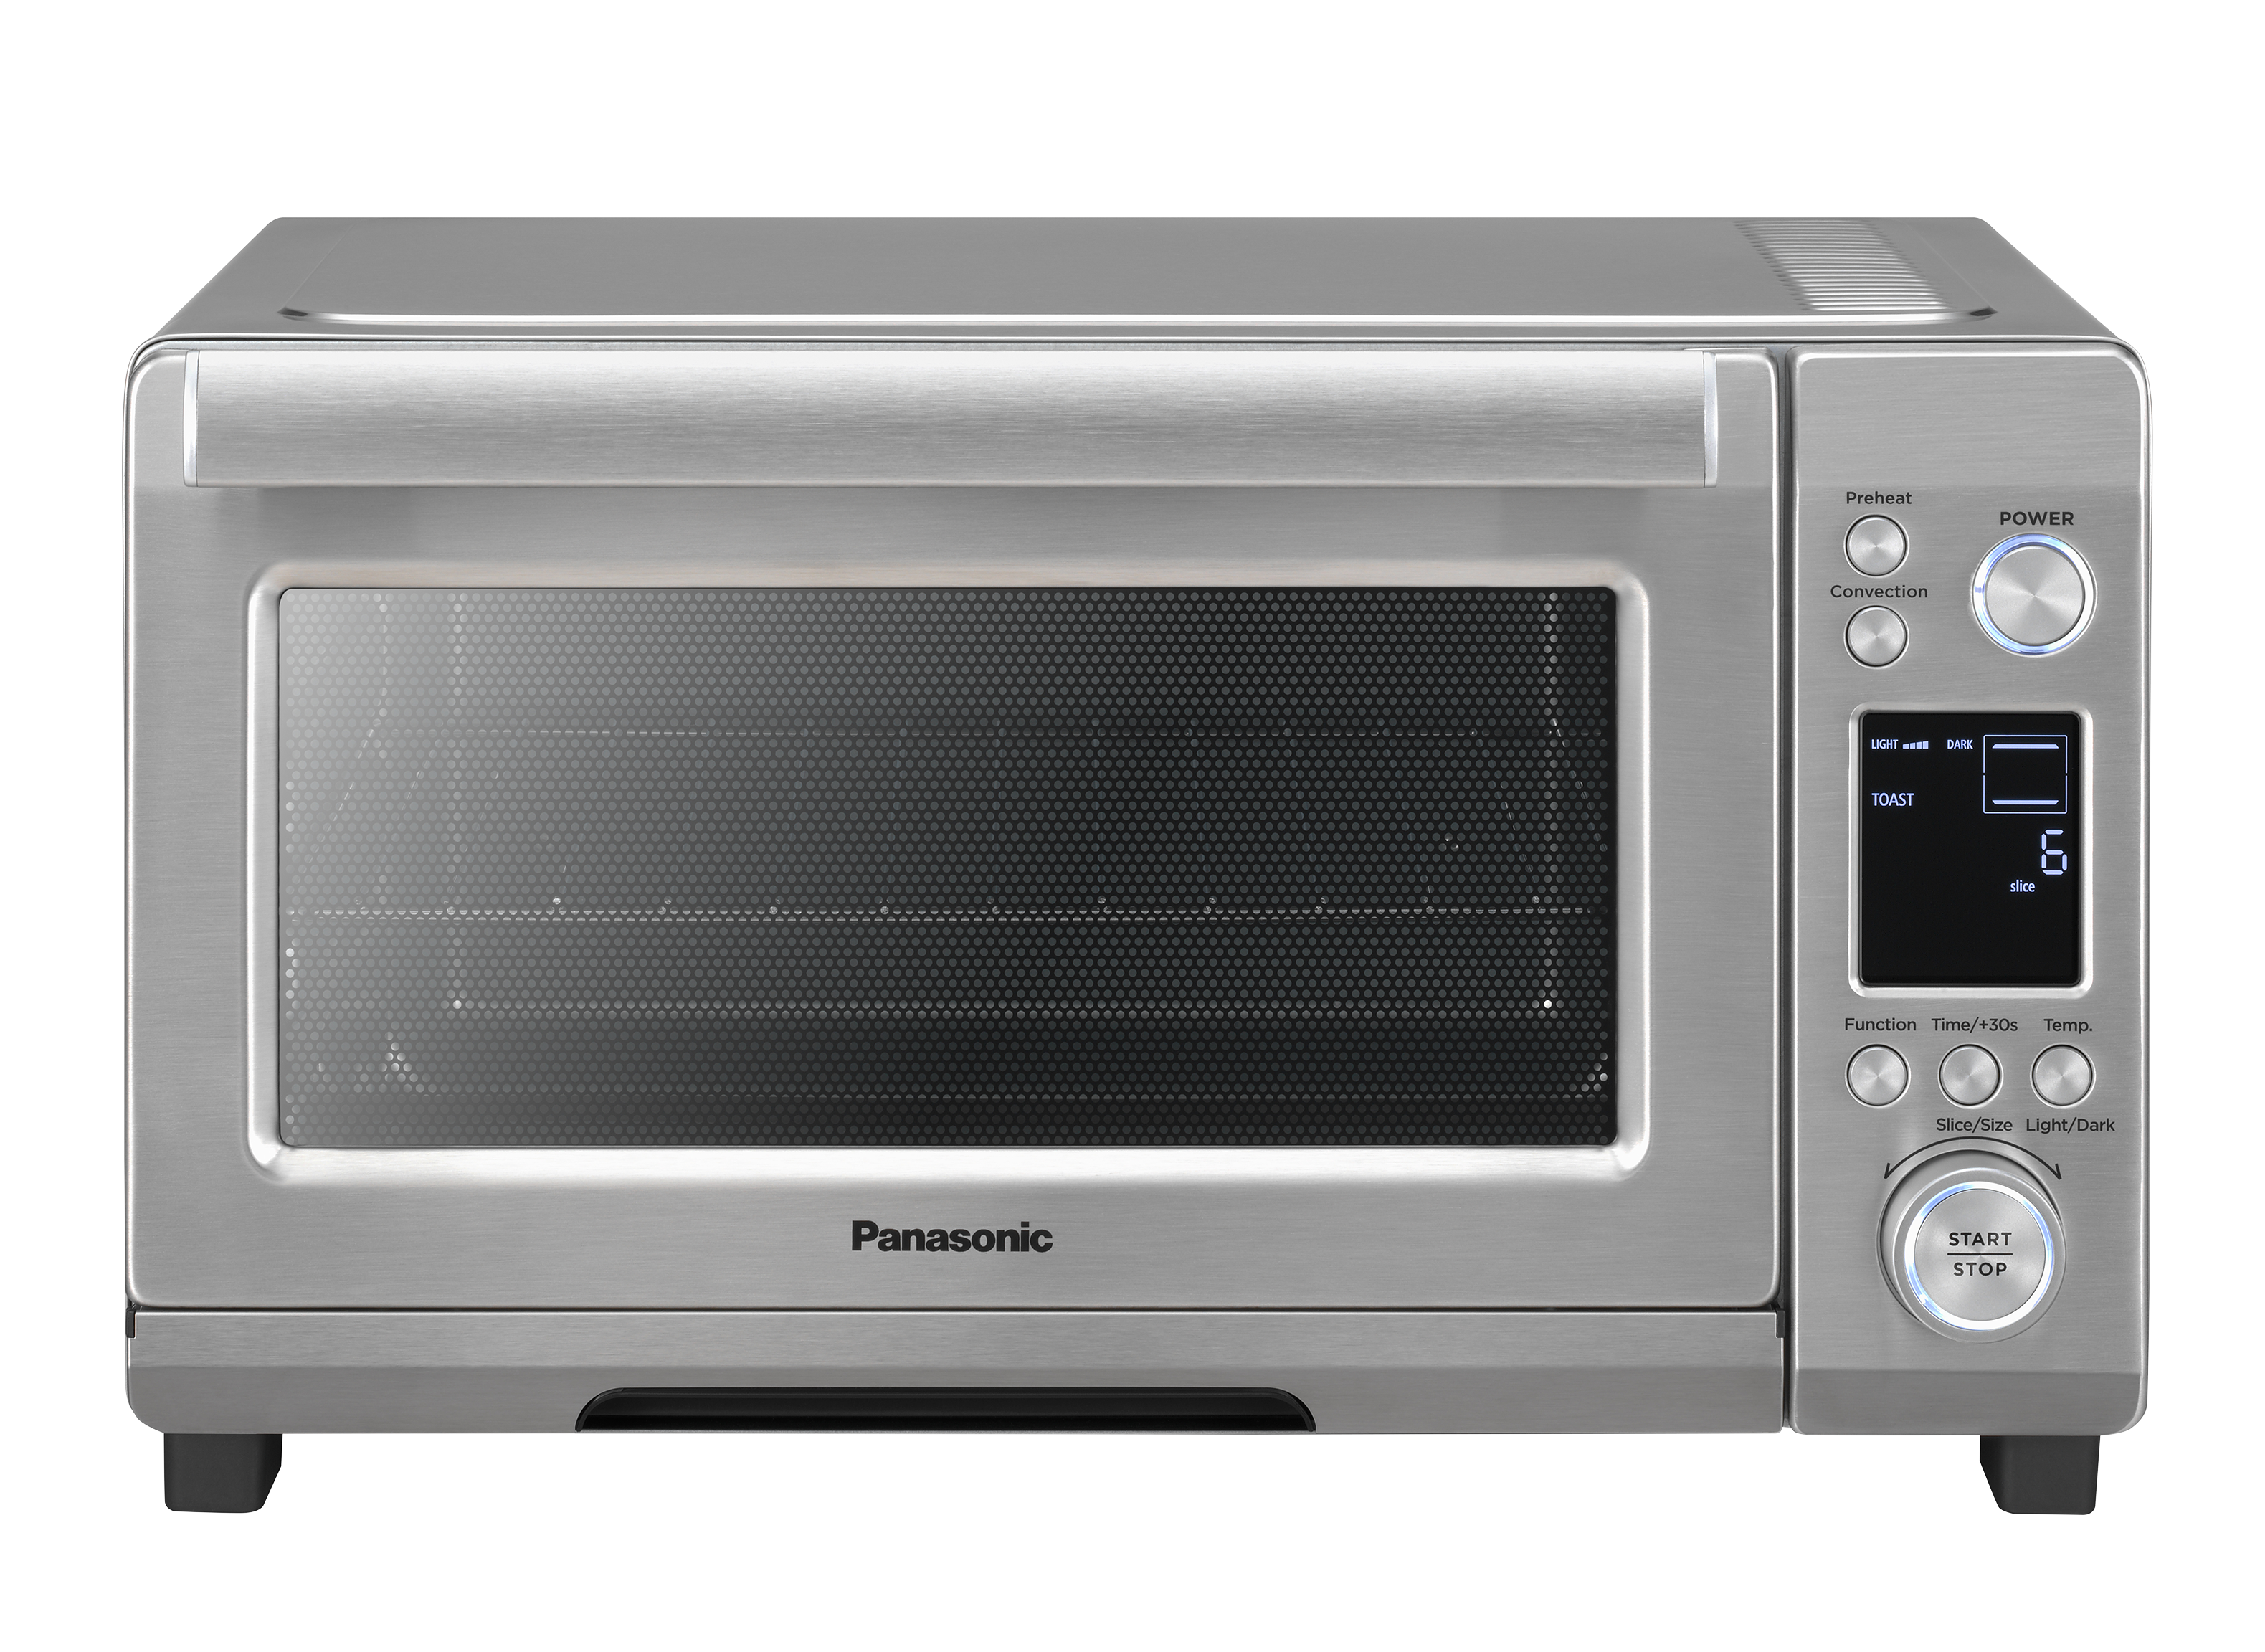 https://crdms.images.consumerreports.org/prod/products/cr/models/398543-toaster-ovens-panasonic-high-speed-nb-w250s-10004946.png